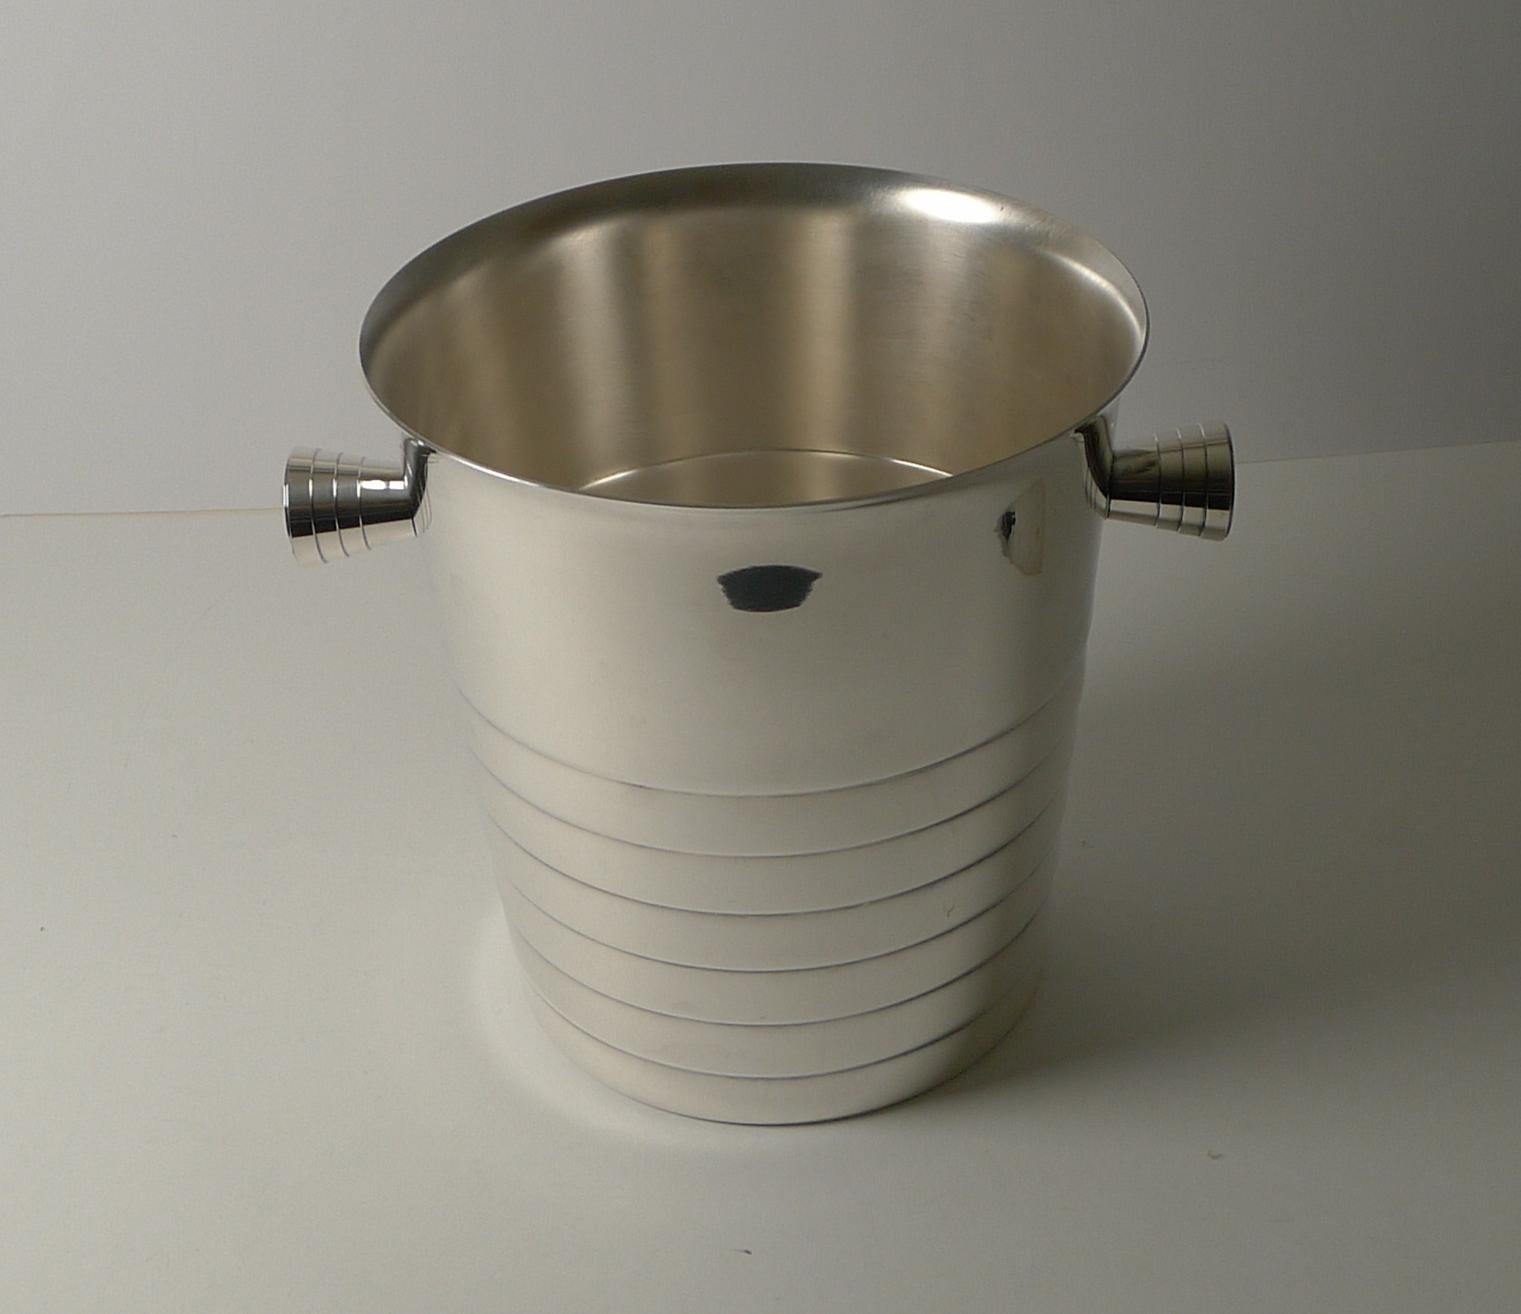 A fine and very smart champagne bucket / wine cooler made by the top-notch French silversmith, Christofle of Paris.

The design is 